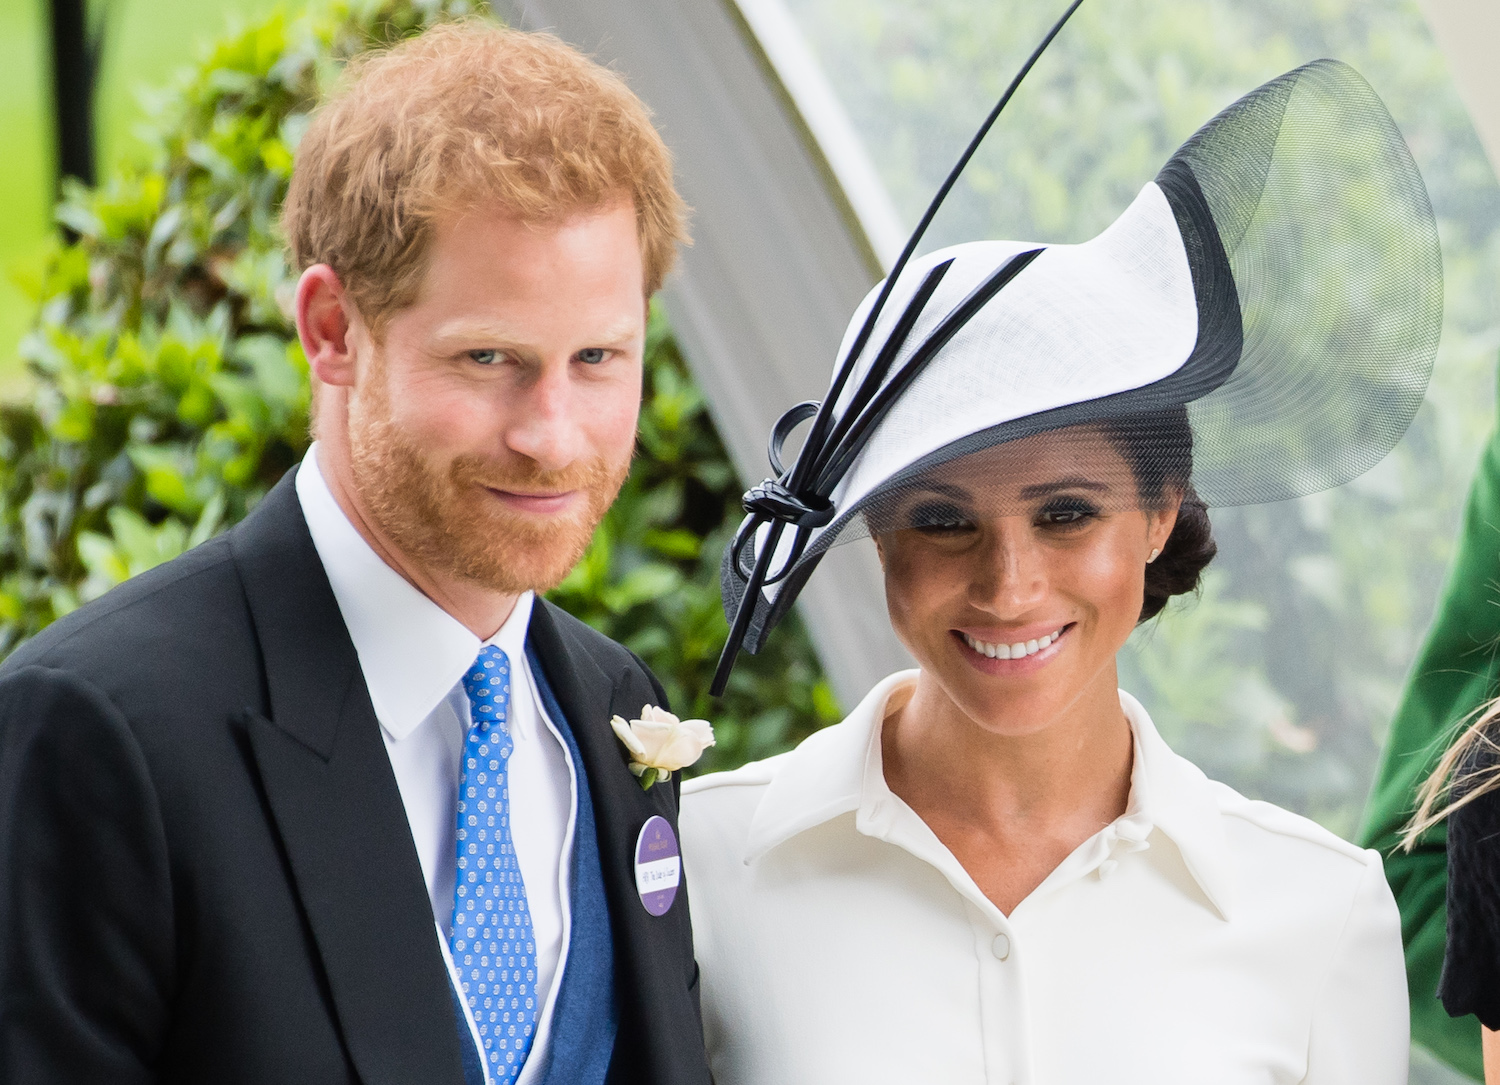 Meghan Markle and Prince Harry attend Royal Ascot Day 1 at Ascot Racecourse on June 19, 2018